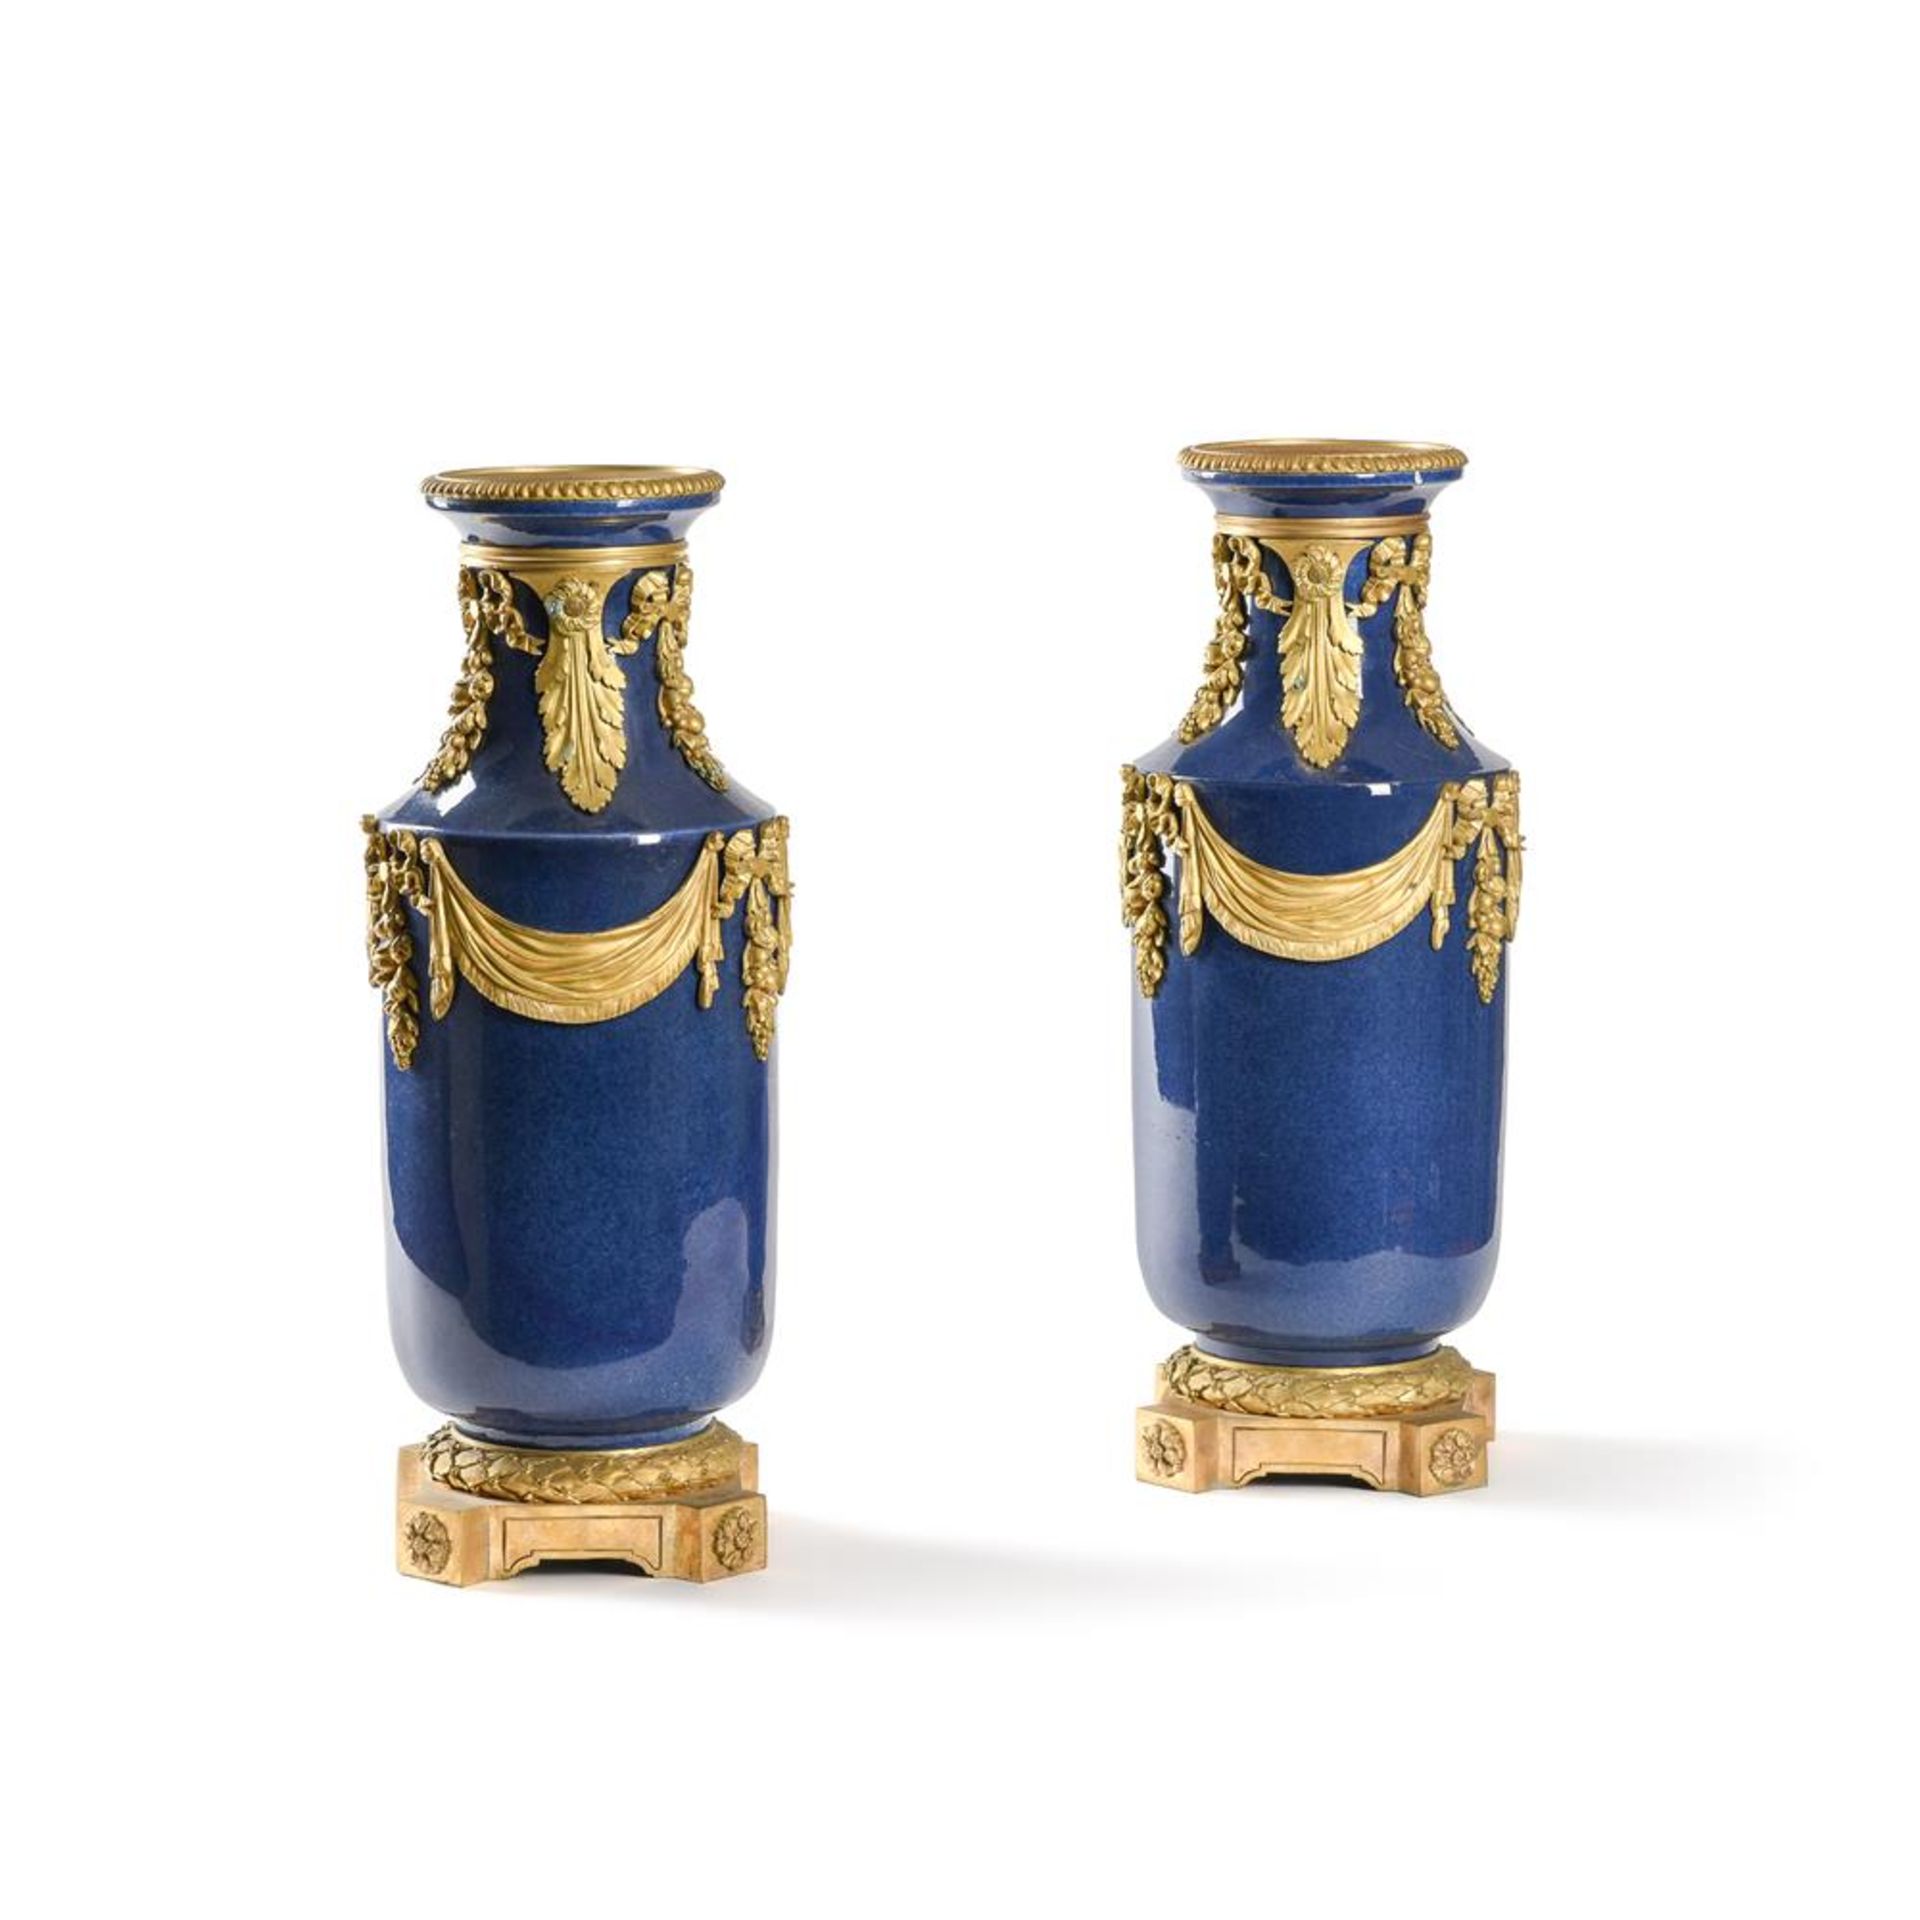 A LARGE PAIR OF ORMOLU MOUNTED BLUE PORCELAIN VASES, FRENCH, 19TH CENTURY